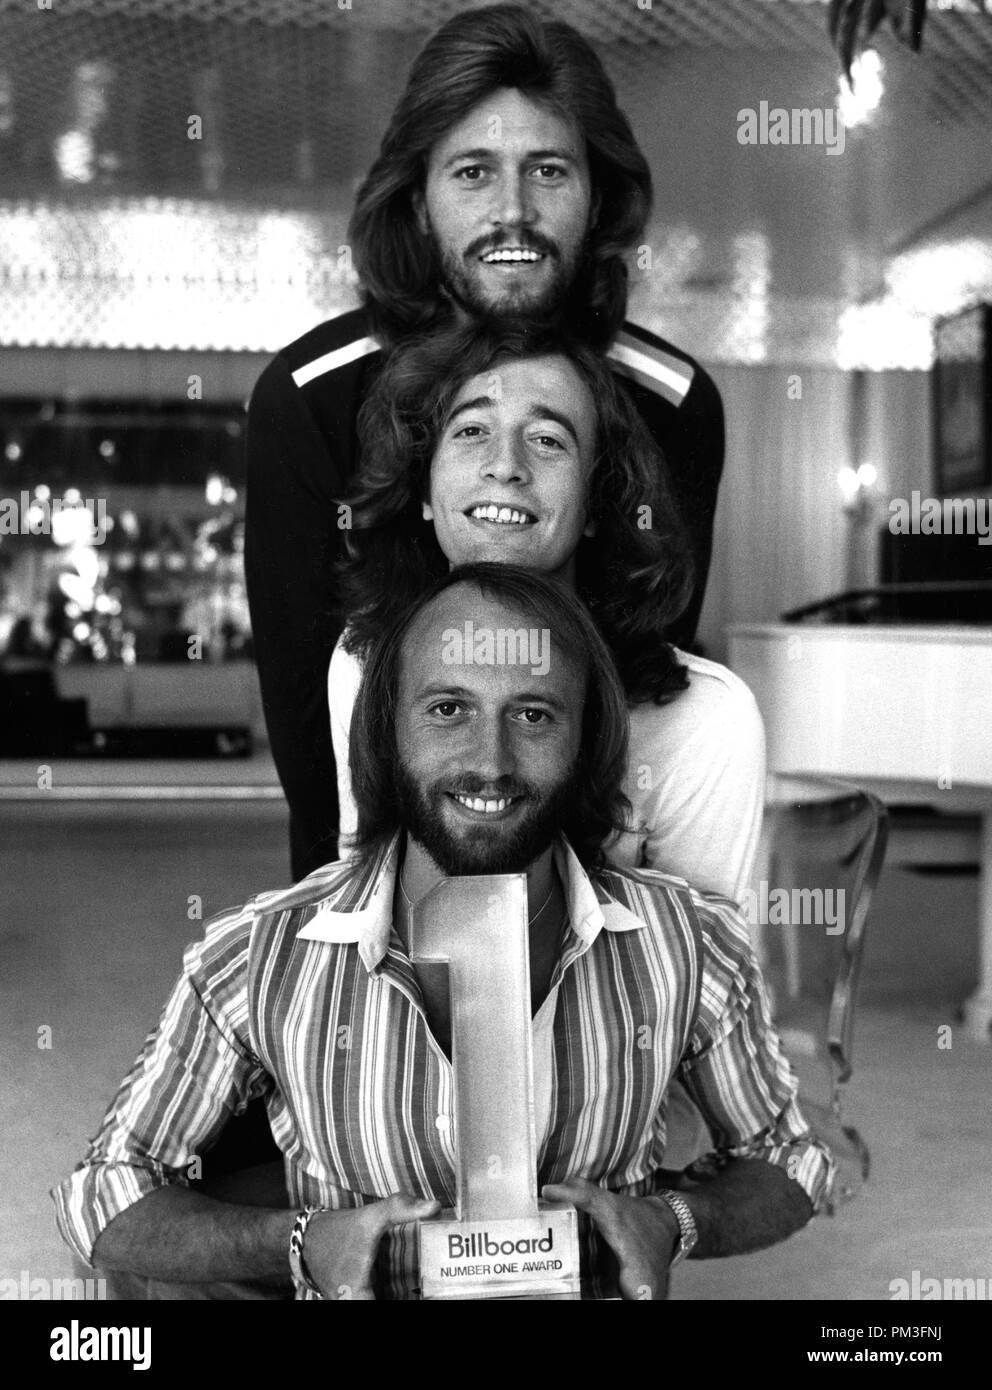 Studio Publicity Still: The Bee Gees (Barry Gibb, Maurice Gibb and Robin Gibb)  circa 1978    File Reference # 30732 1284THA Stock Photo